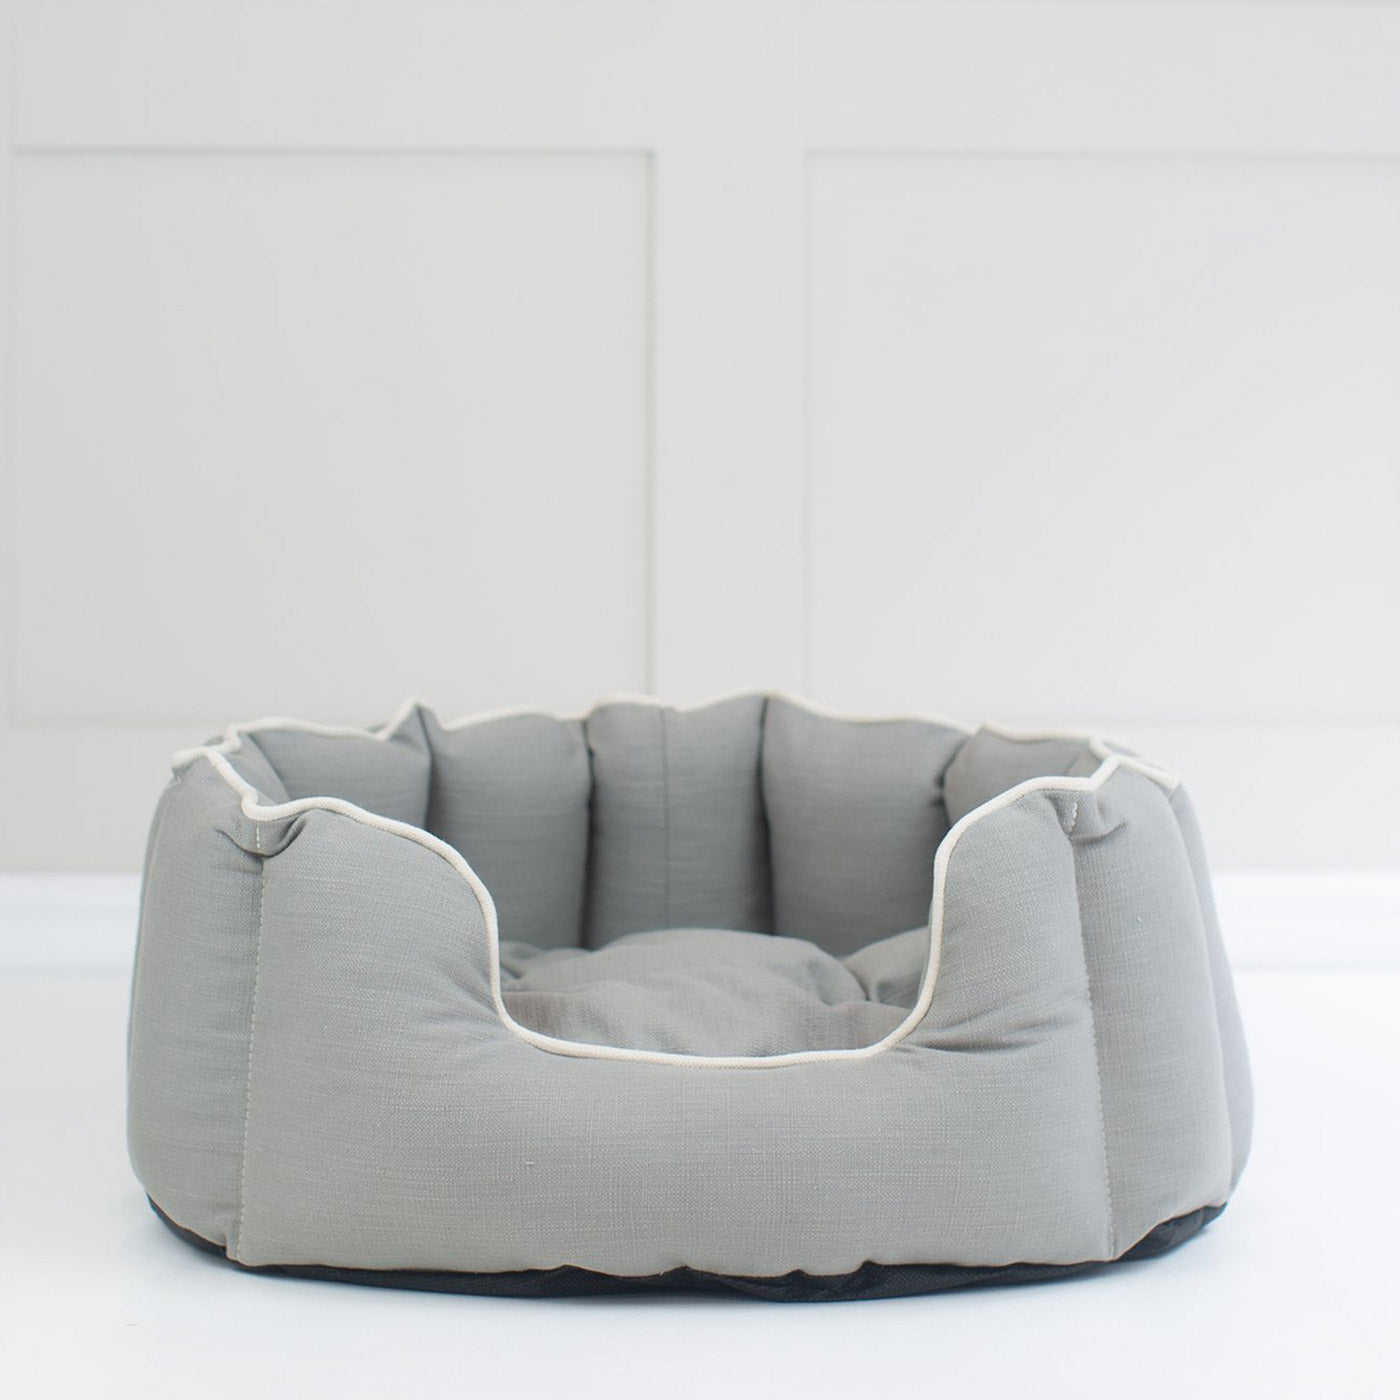 Discover Our Luxurious High Wall Bed For Cats, Featuring inner pillow with plush teddy fleece on one side To Craft The Perfect Cats Bed In Stunning Stone Oatmeal! Available To Personalise Now at Lords & Labradors    